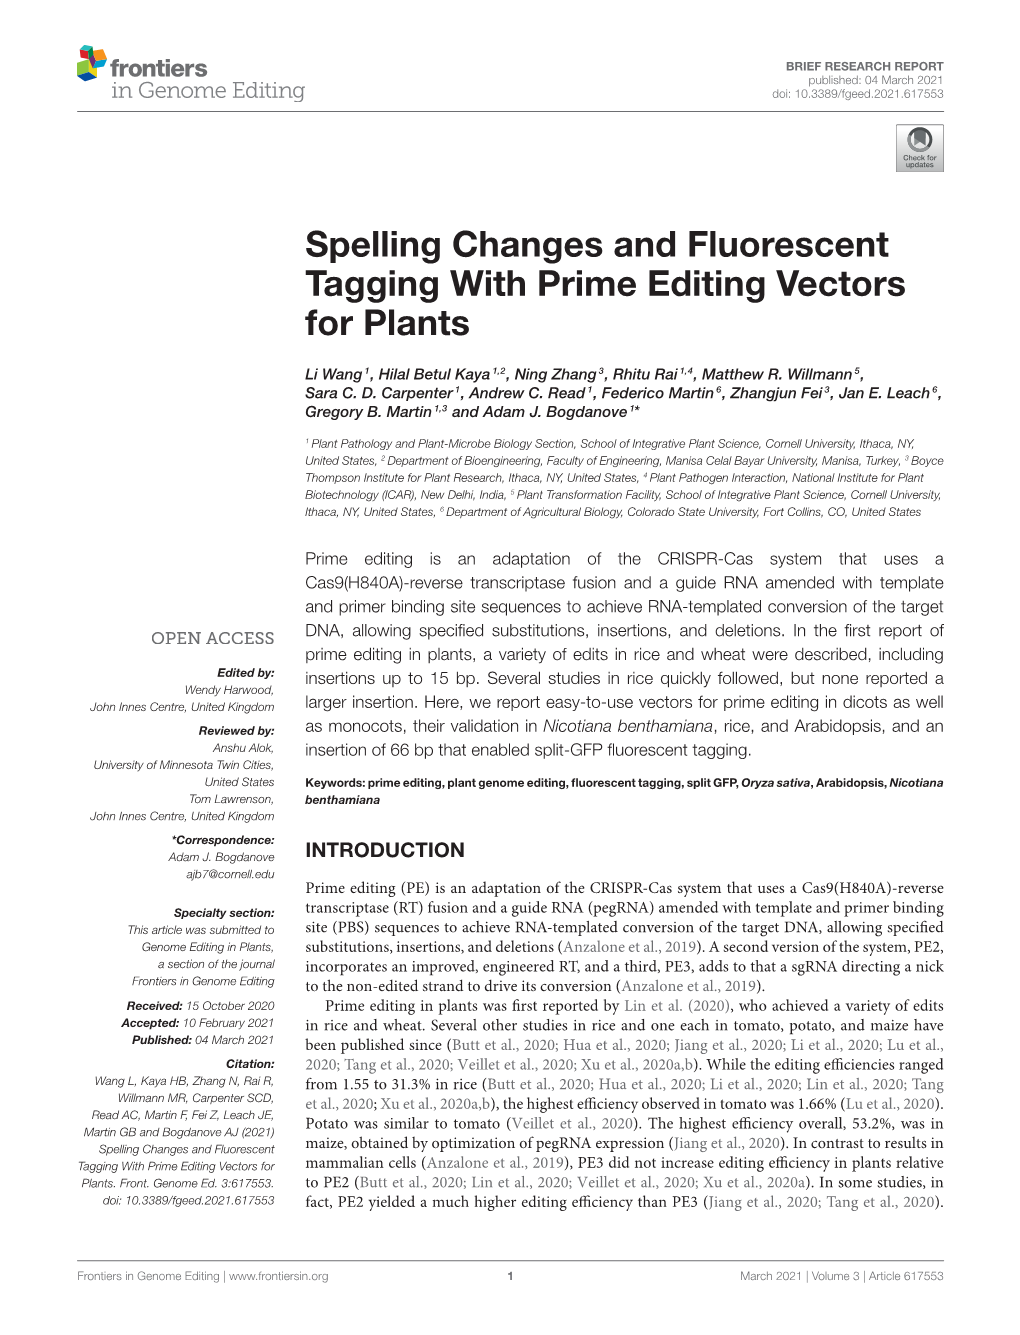 Spelling Changes and Fluorescent Tagging with Prime Editing Vectors for Plants